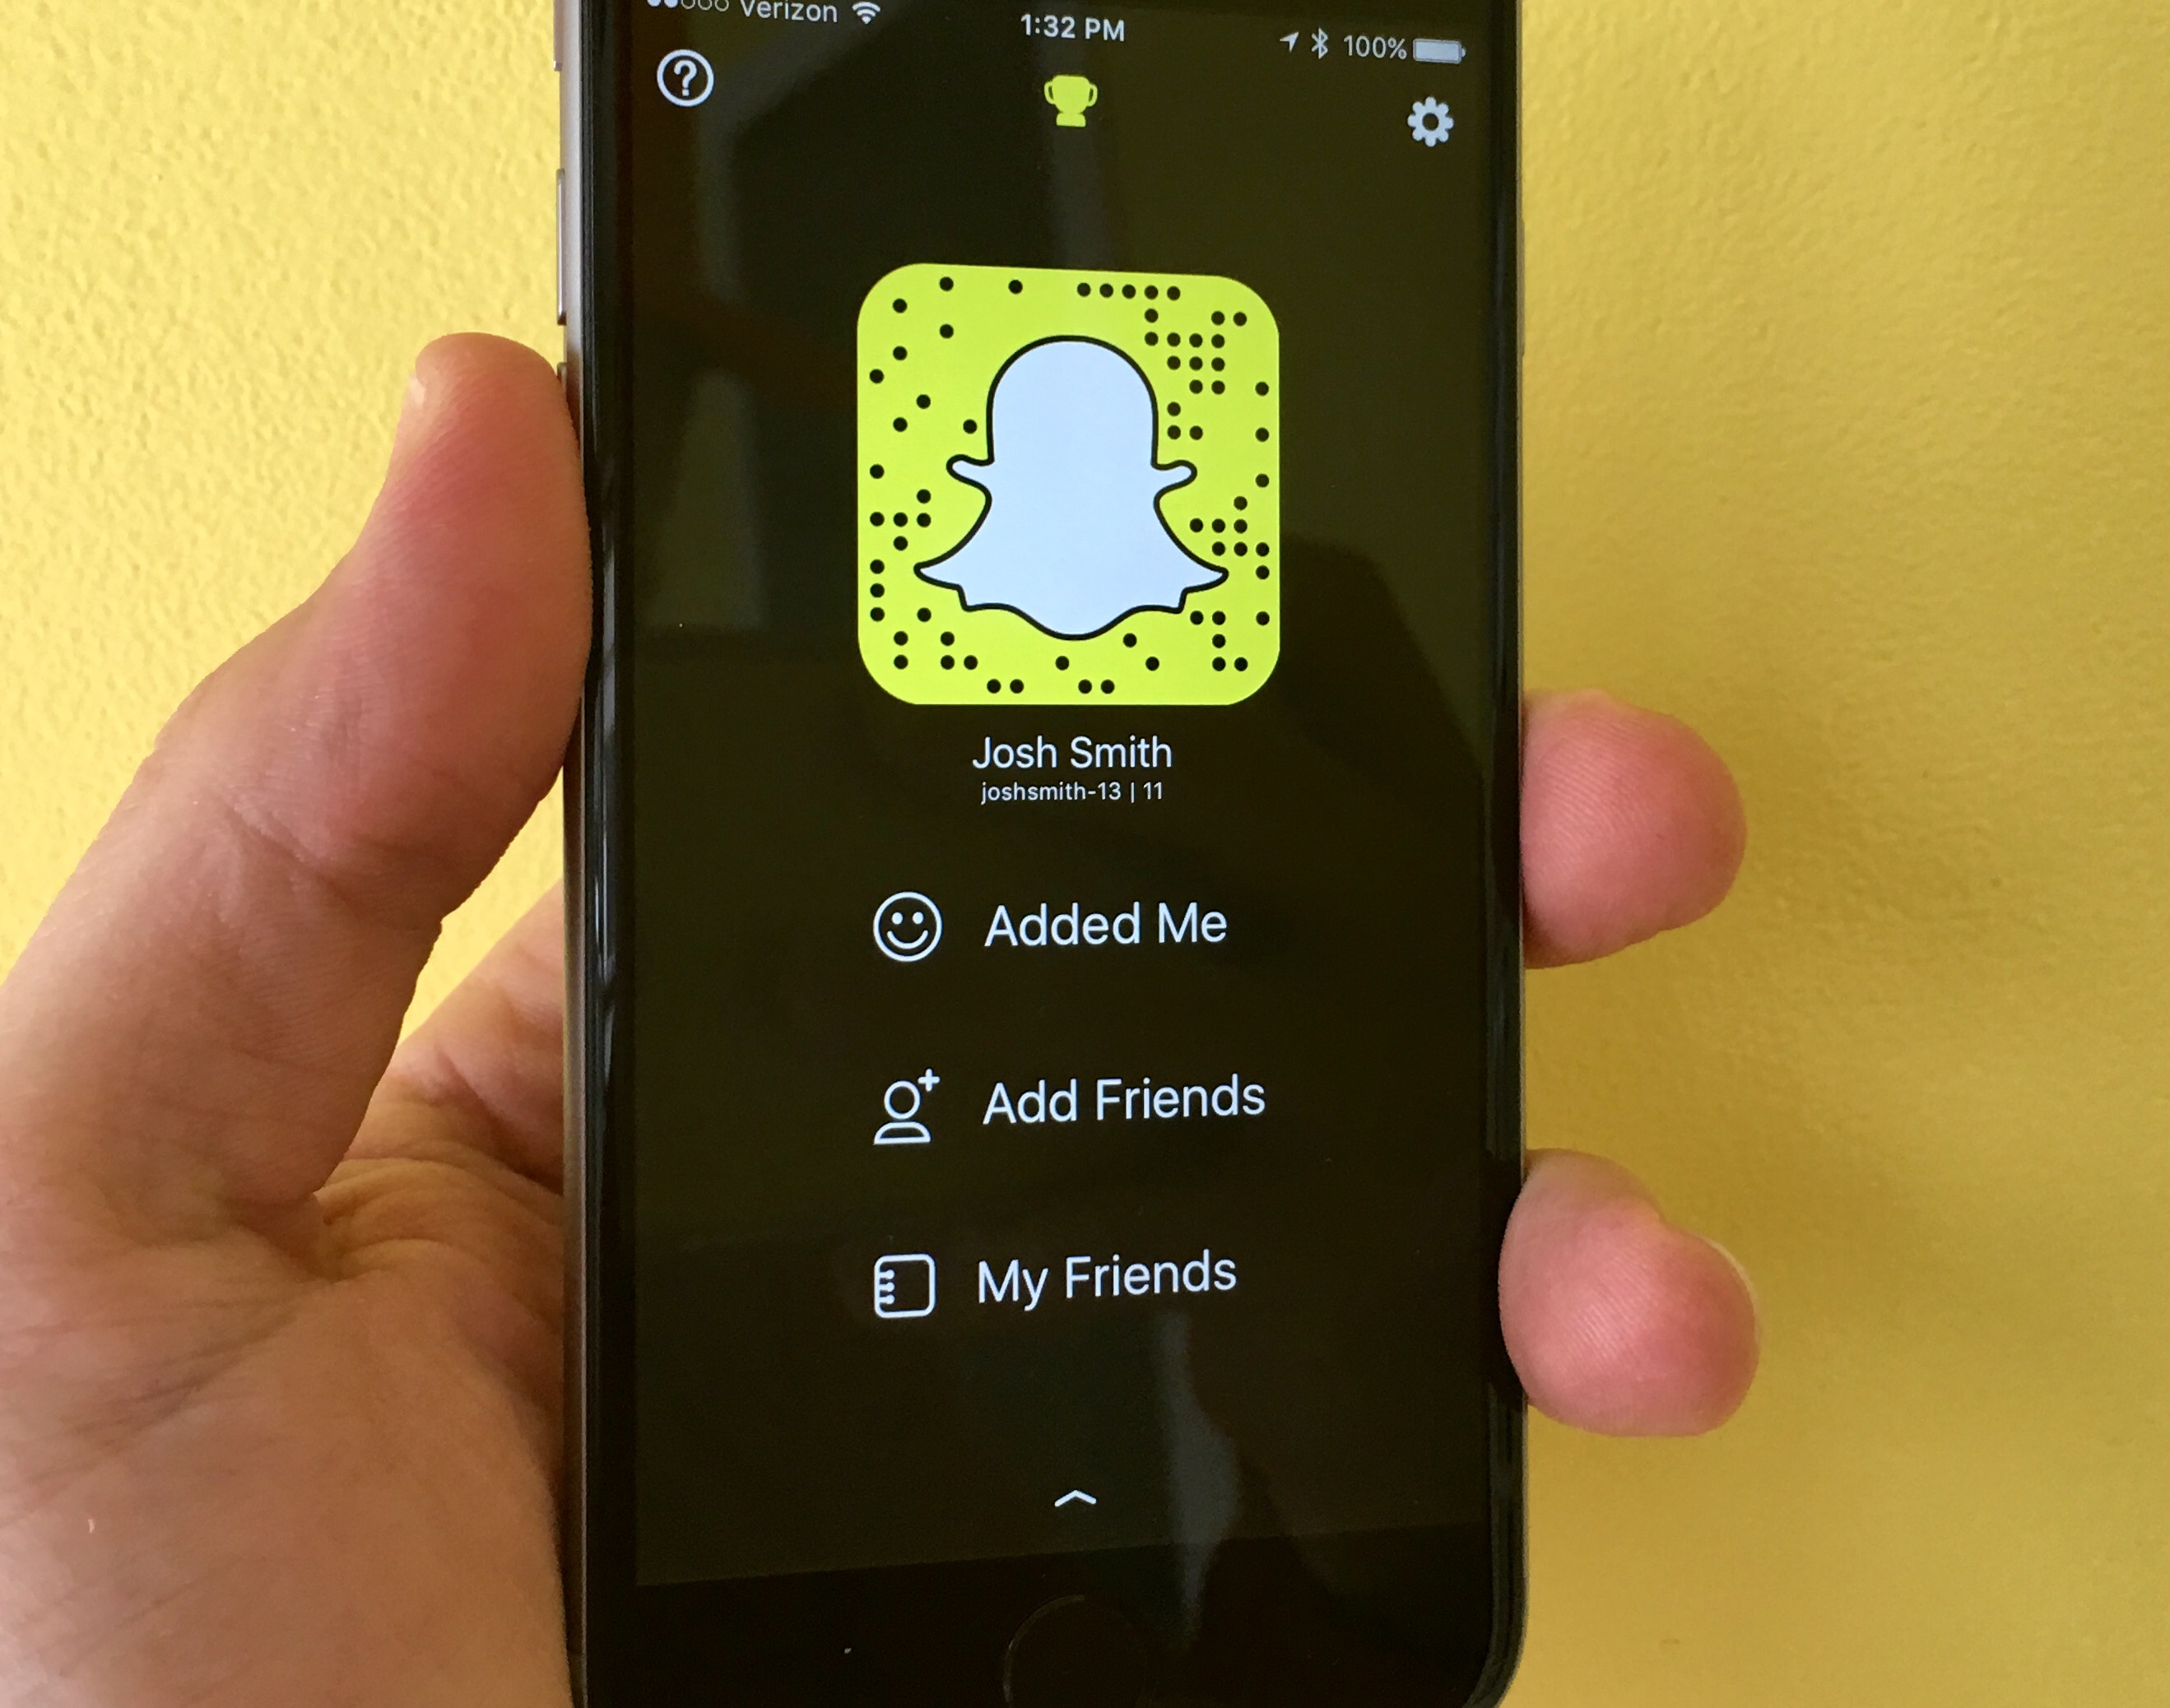 Learn how to fix common Snapchat problems on your iPhone or Android.